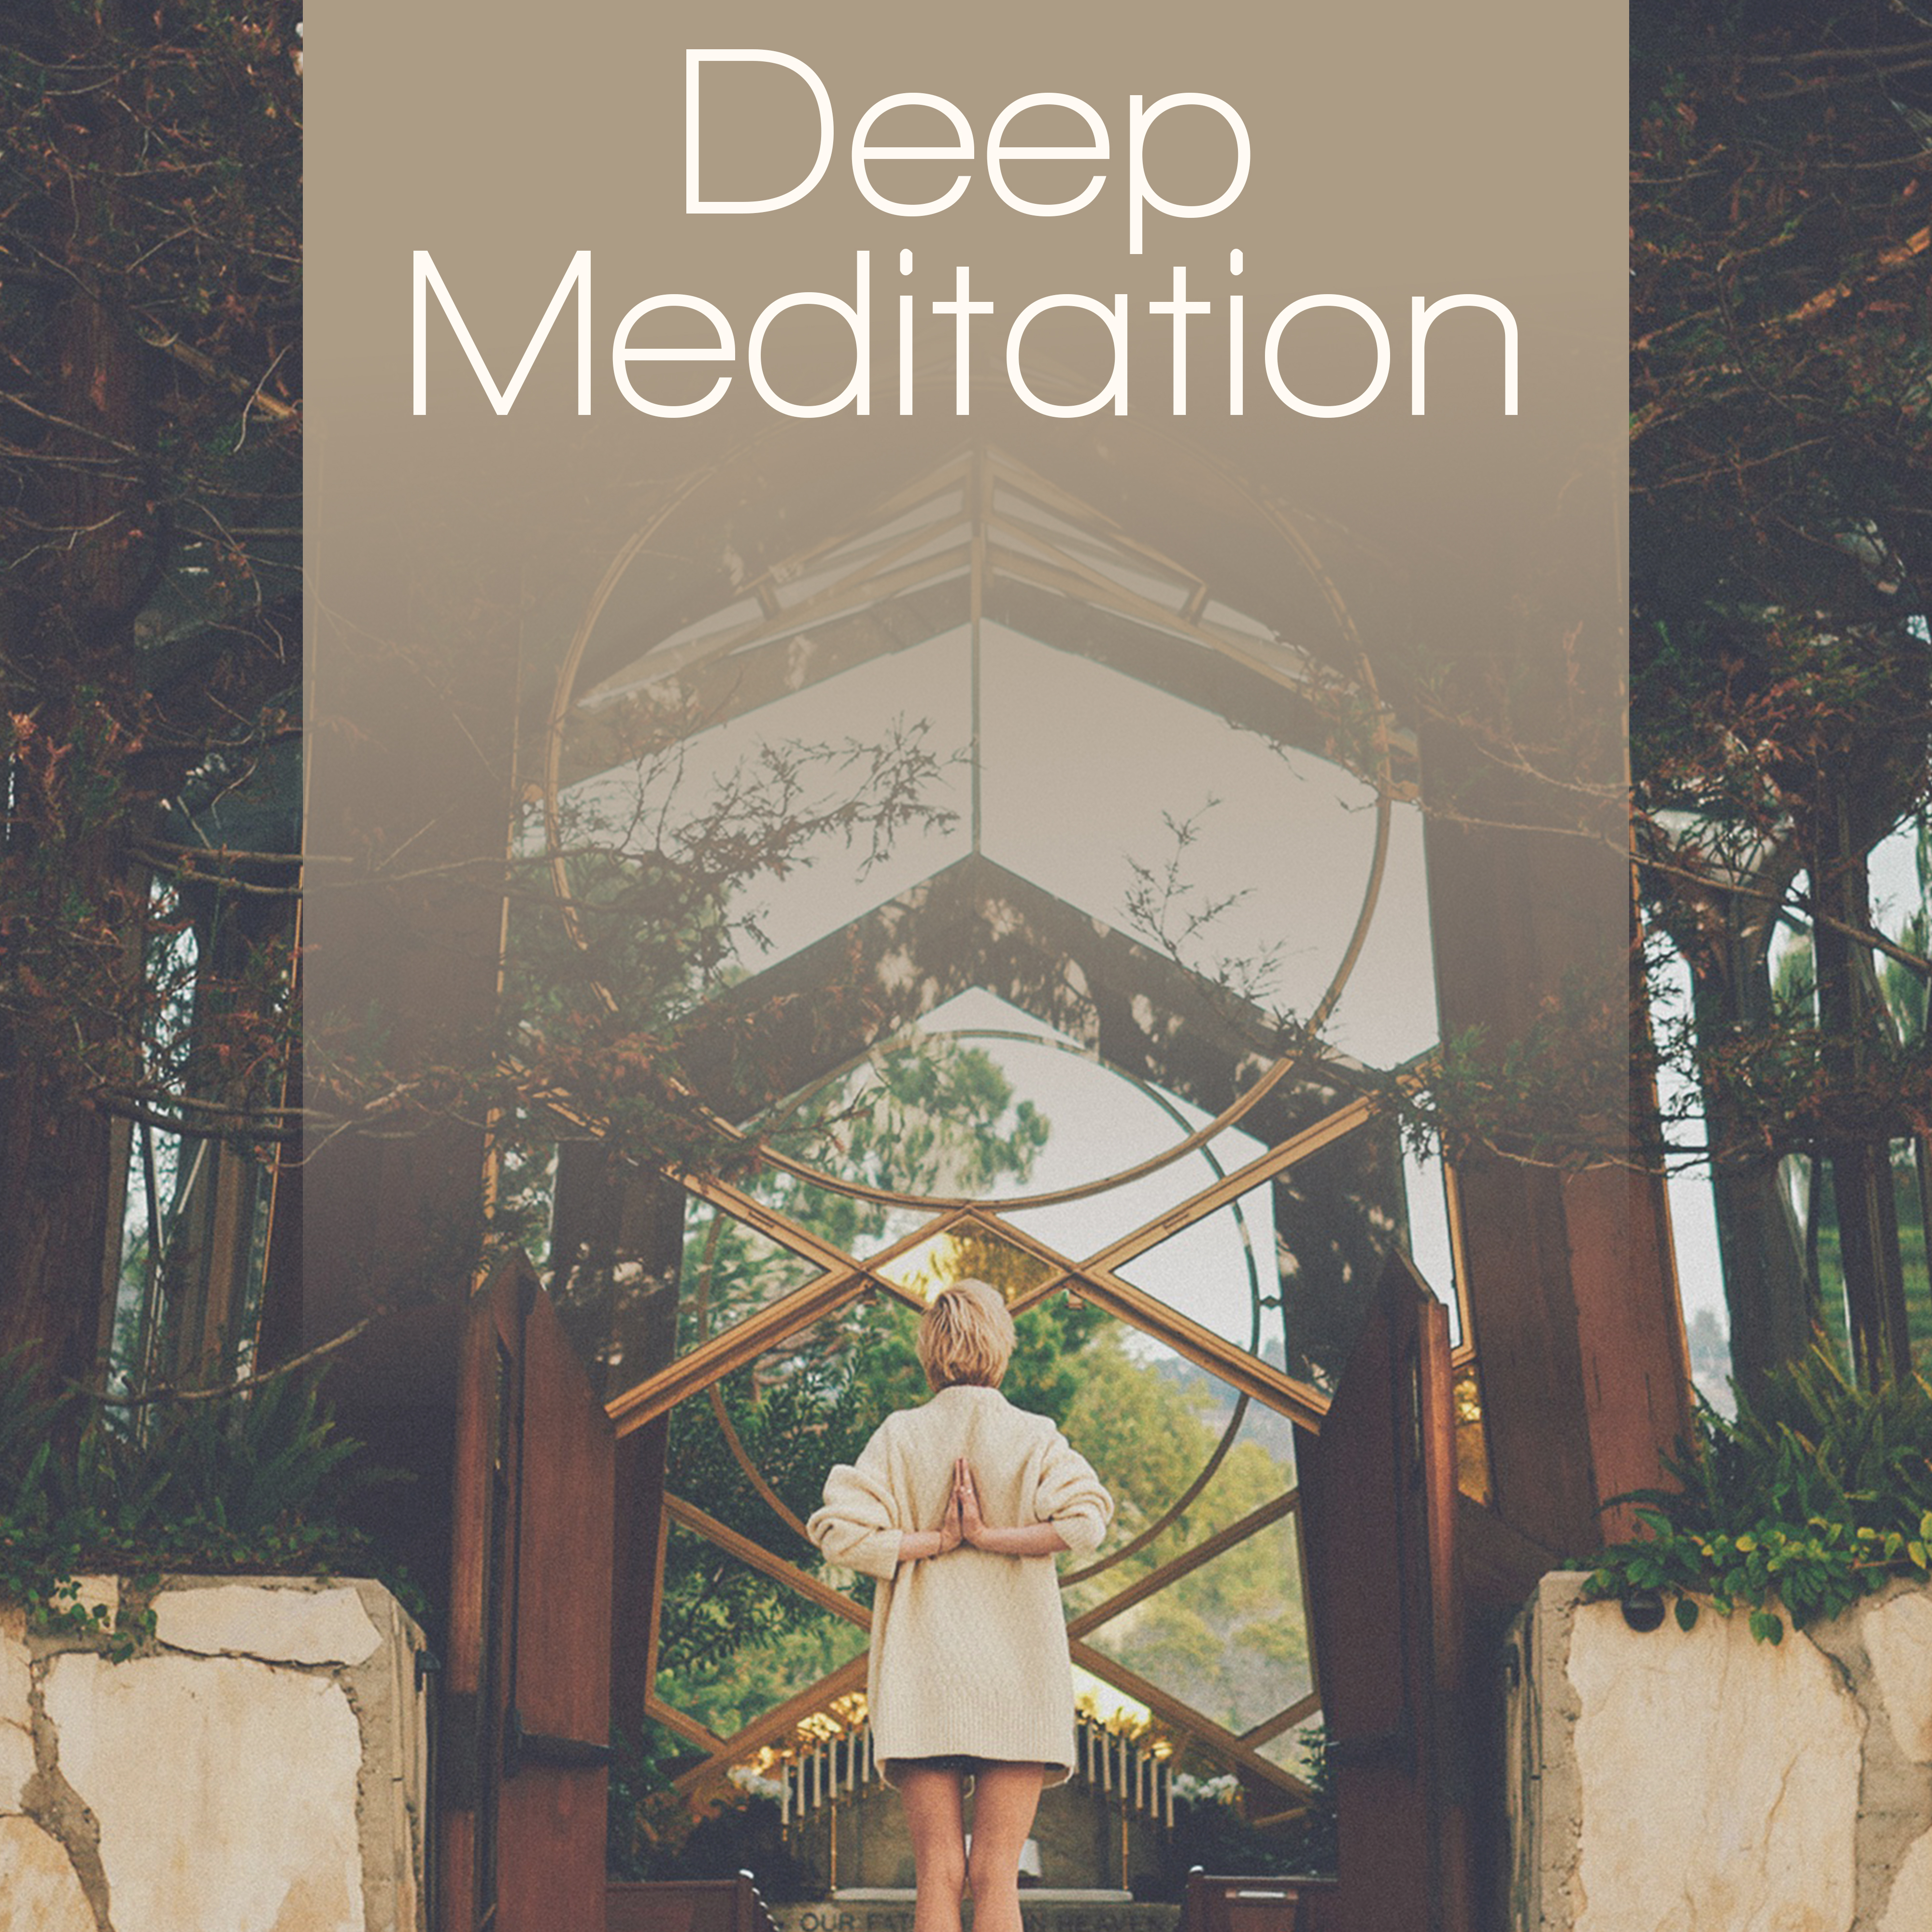 Deep Meditation  Relax, Yoga, Nature Sounds for Pure Mind, Harmony  Concentration, Soothing Piano, Relaxing Music, Stress Relief, Yoga Meditation